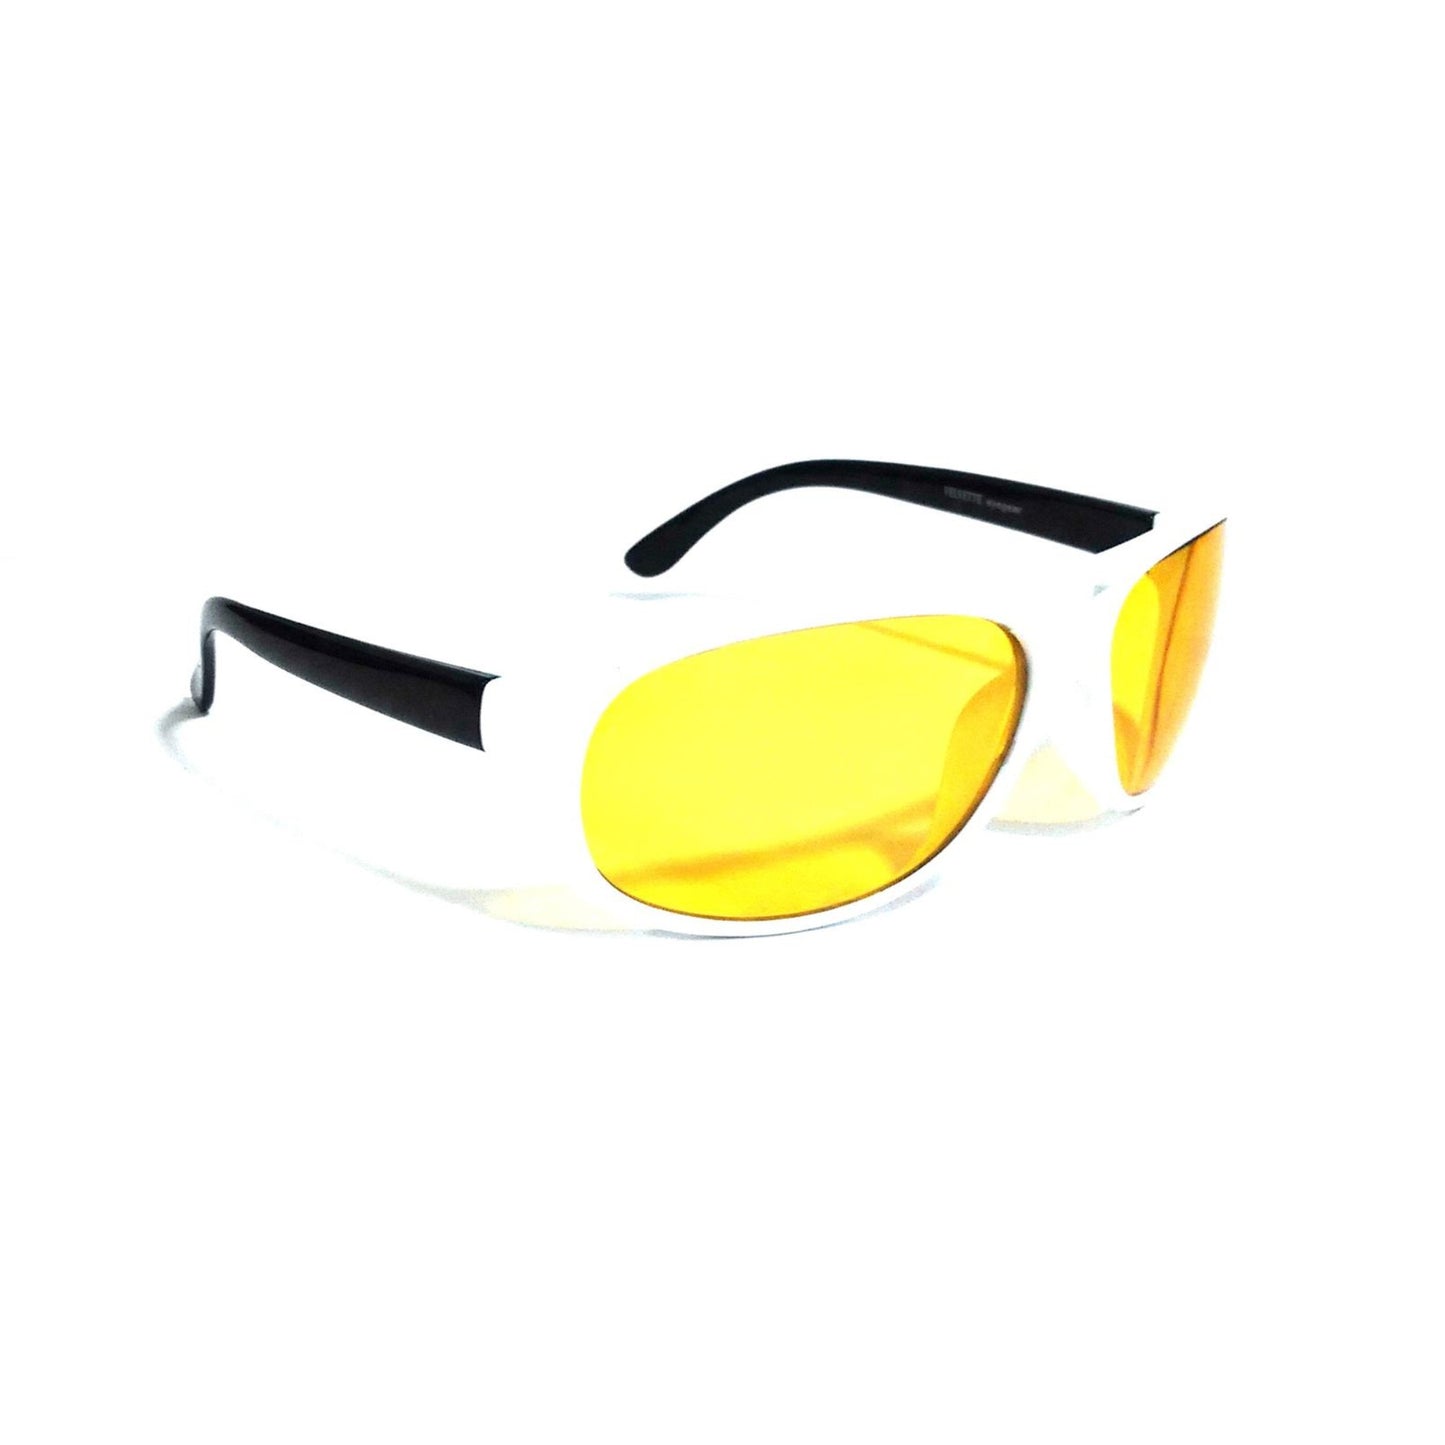 HD Vision Night Driving Glasses with Anti Glare Coating 4012